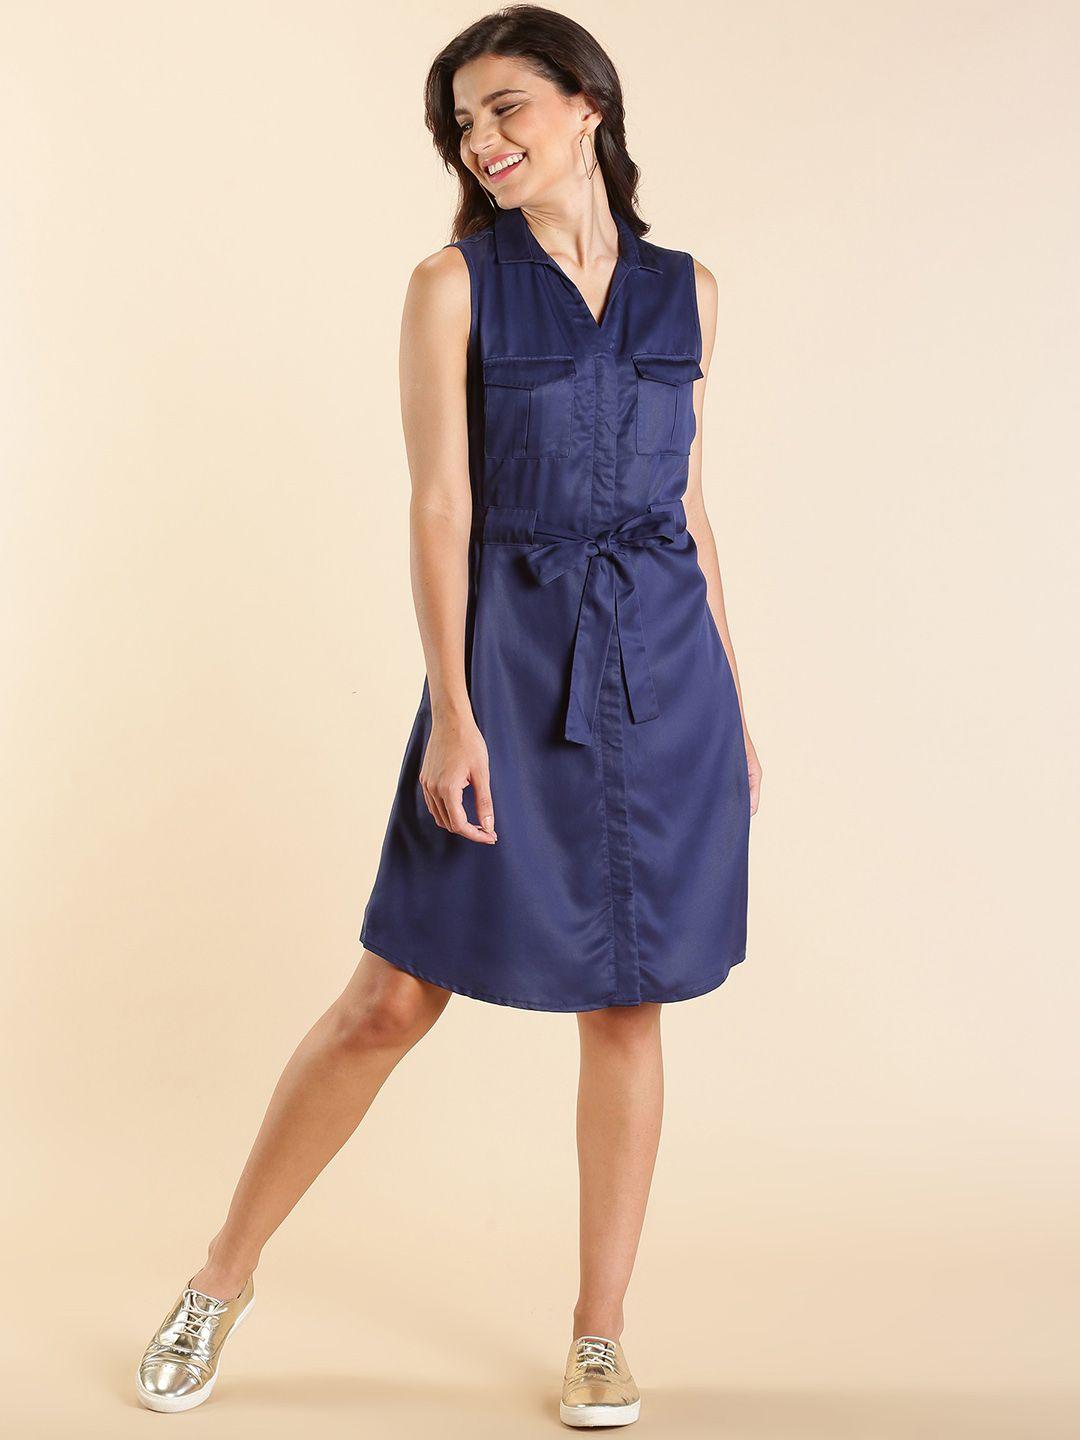 allen solly woman navy blue solid shirt dress with waist tie-ups